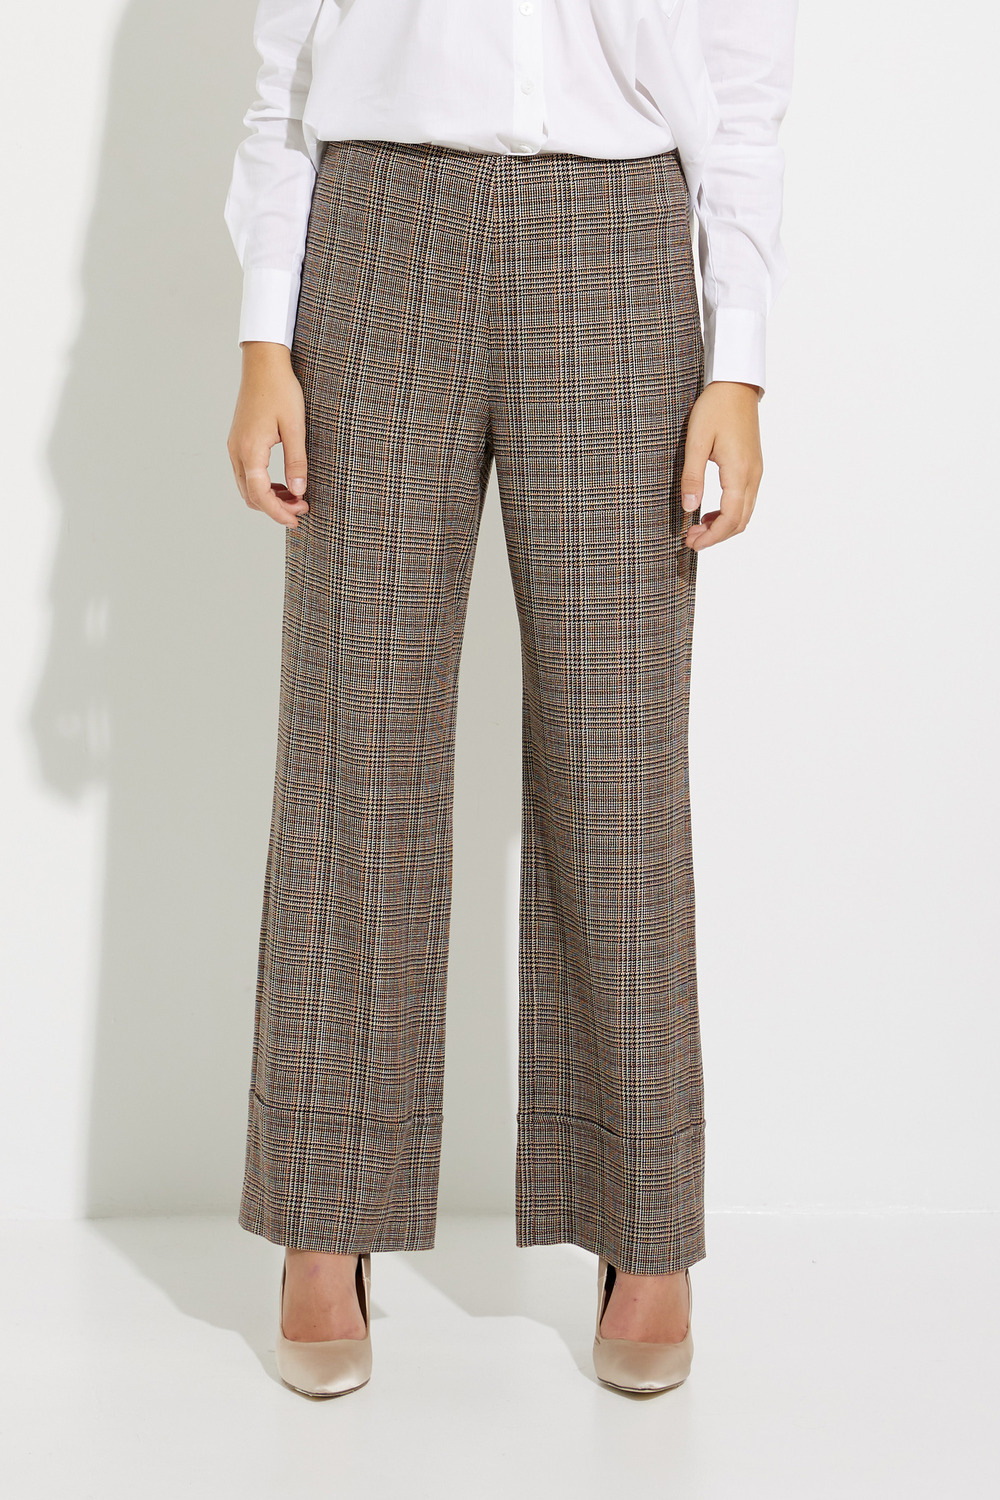 Plaid Pants With Cuff Detail Style C5354. Spice